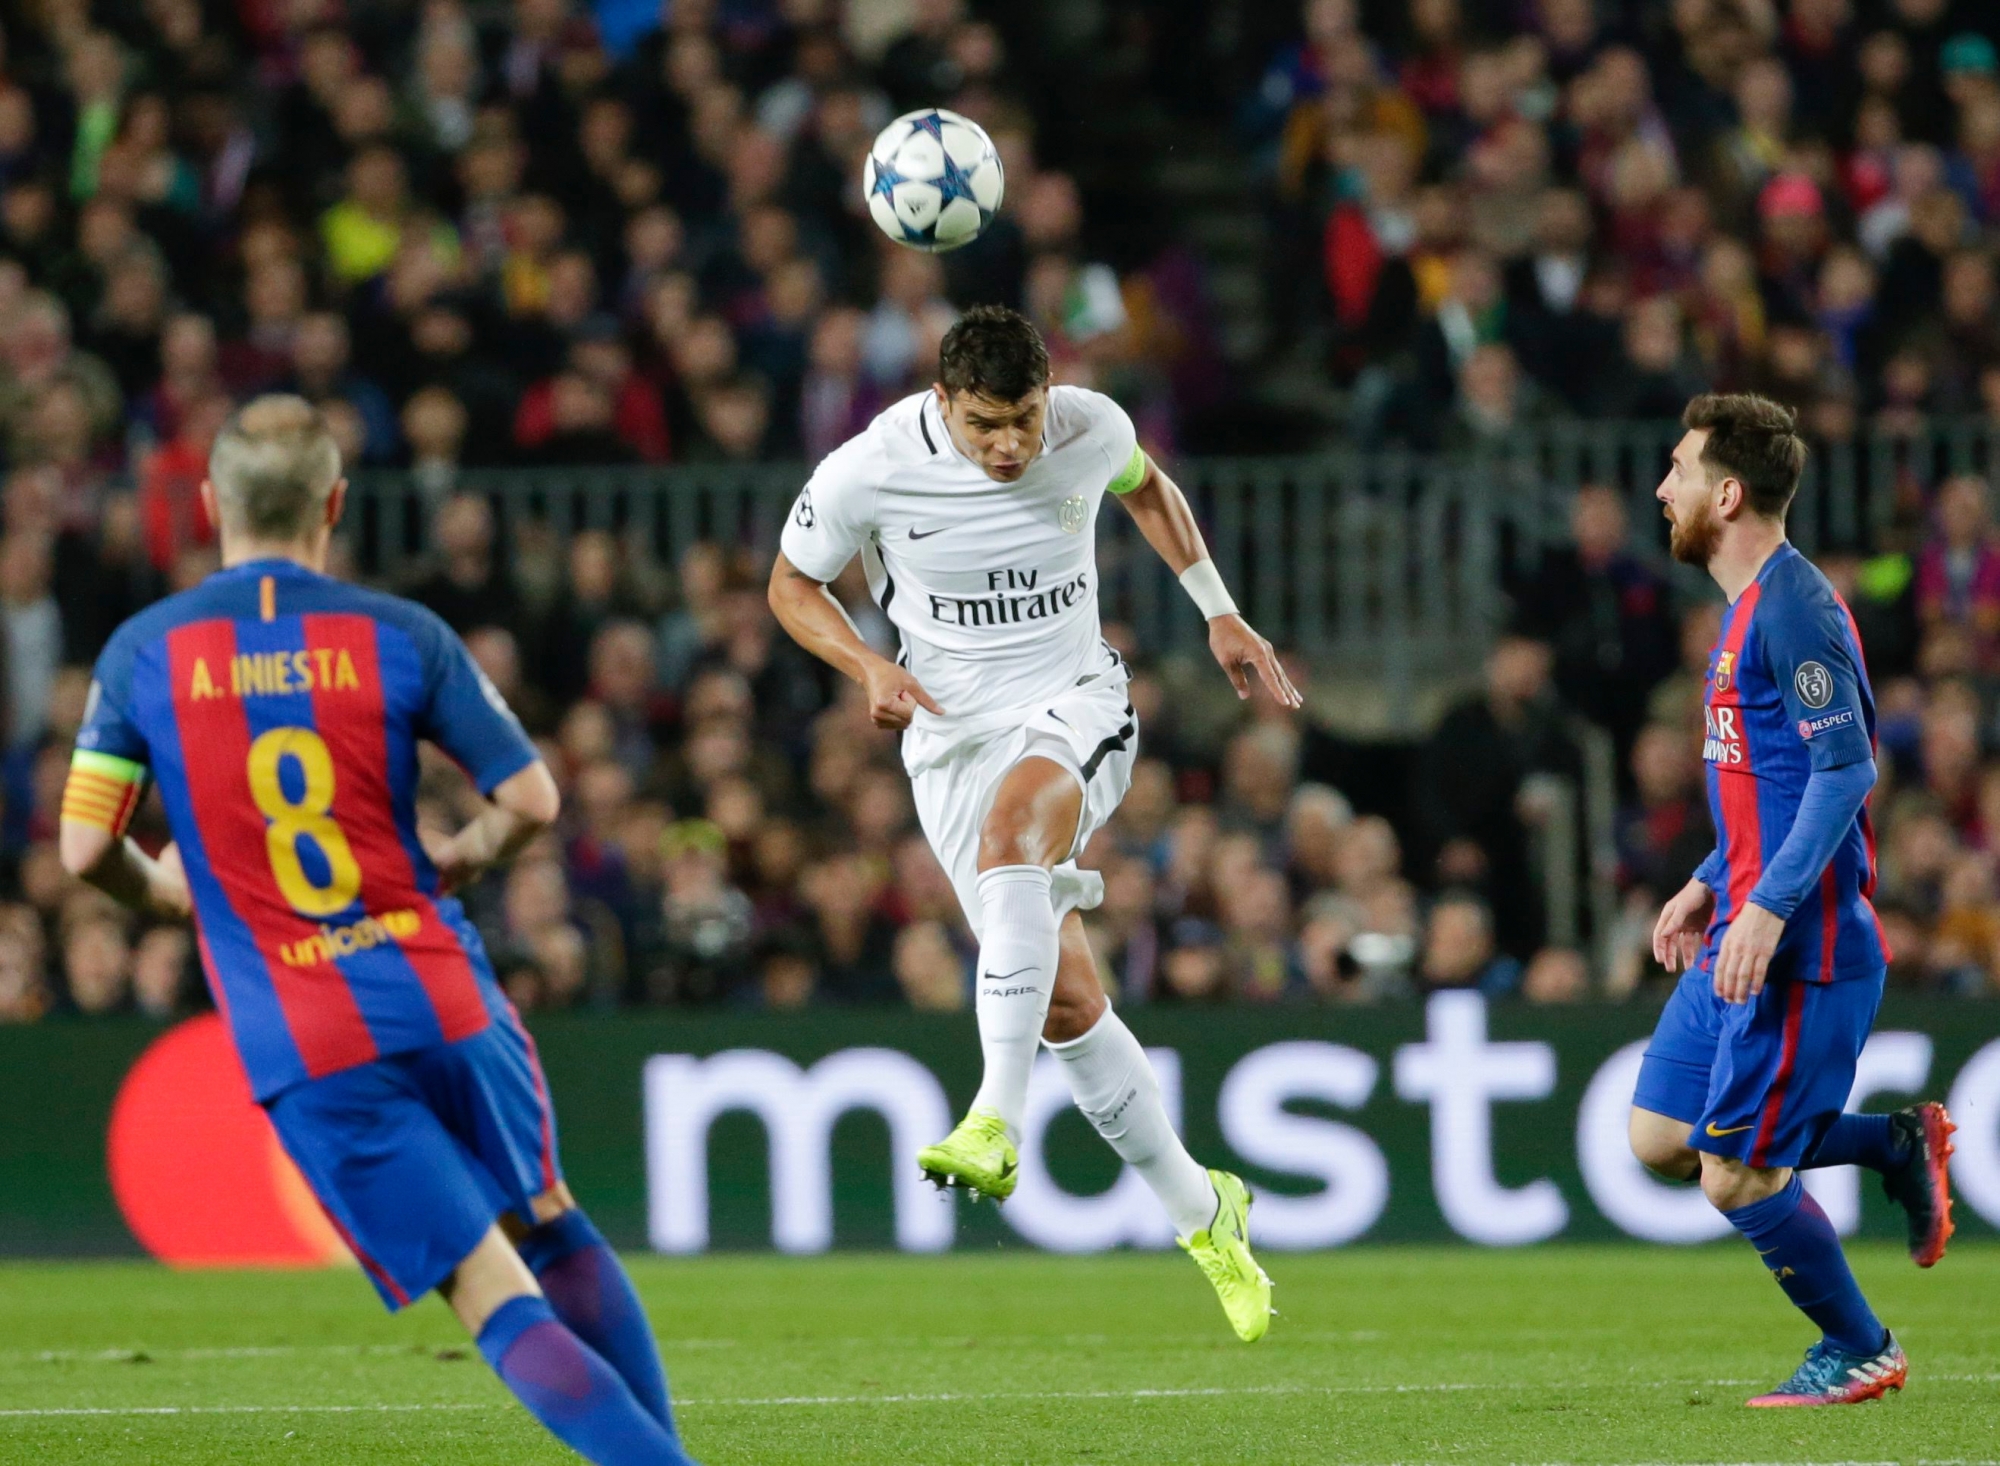 PSG's Thiago Silva heads the ball during the Champion's League round of 16, second leg soccer match between FC Barcelona and Paris Saint Germain at the Camp Nou stadium in Barcelona, Spain, Wednesday March 8, 2017. (AP Photo/Emilio Morenatti) Spain Soccer Champions League